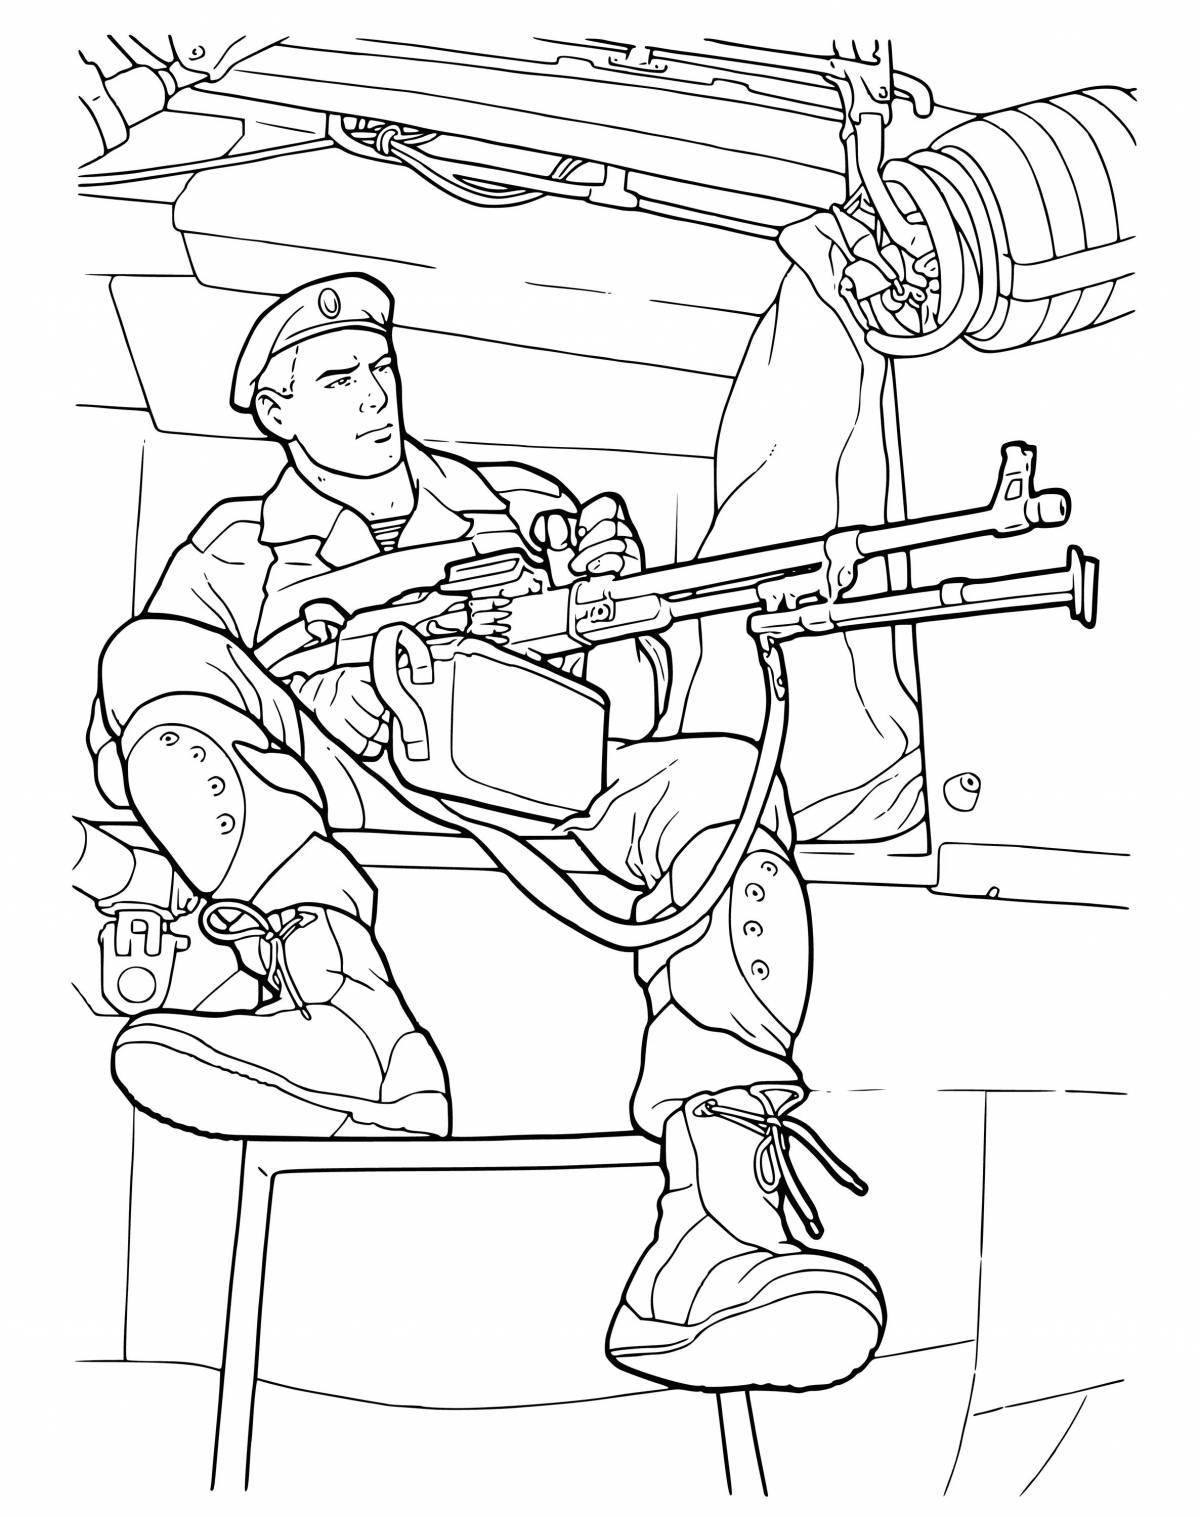 Valiant soldiers coloring pages for boys